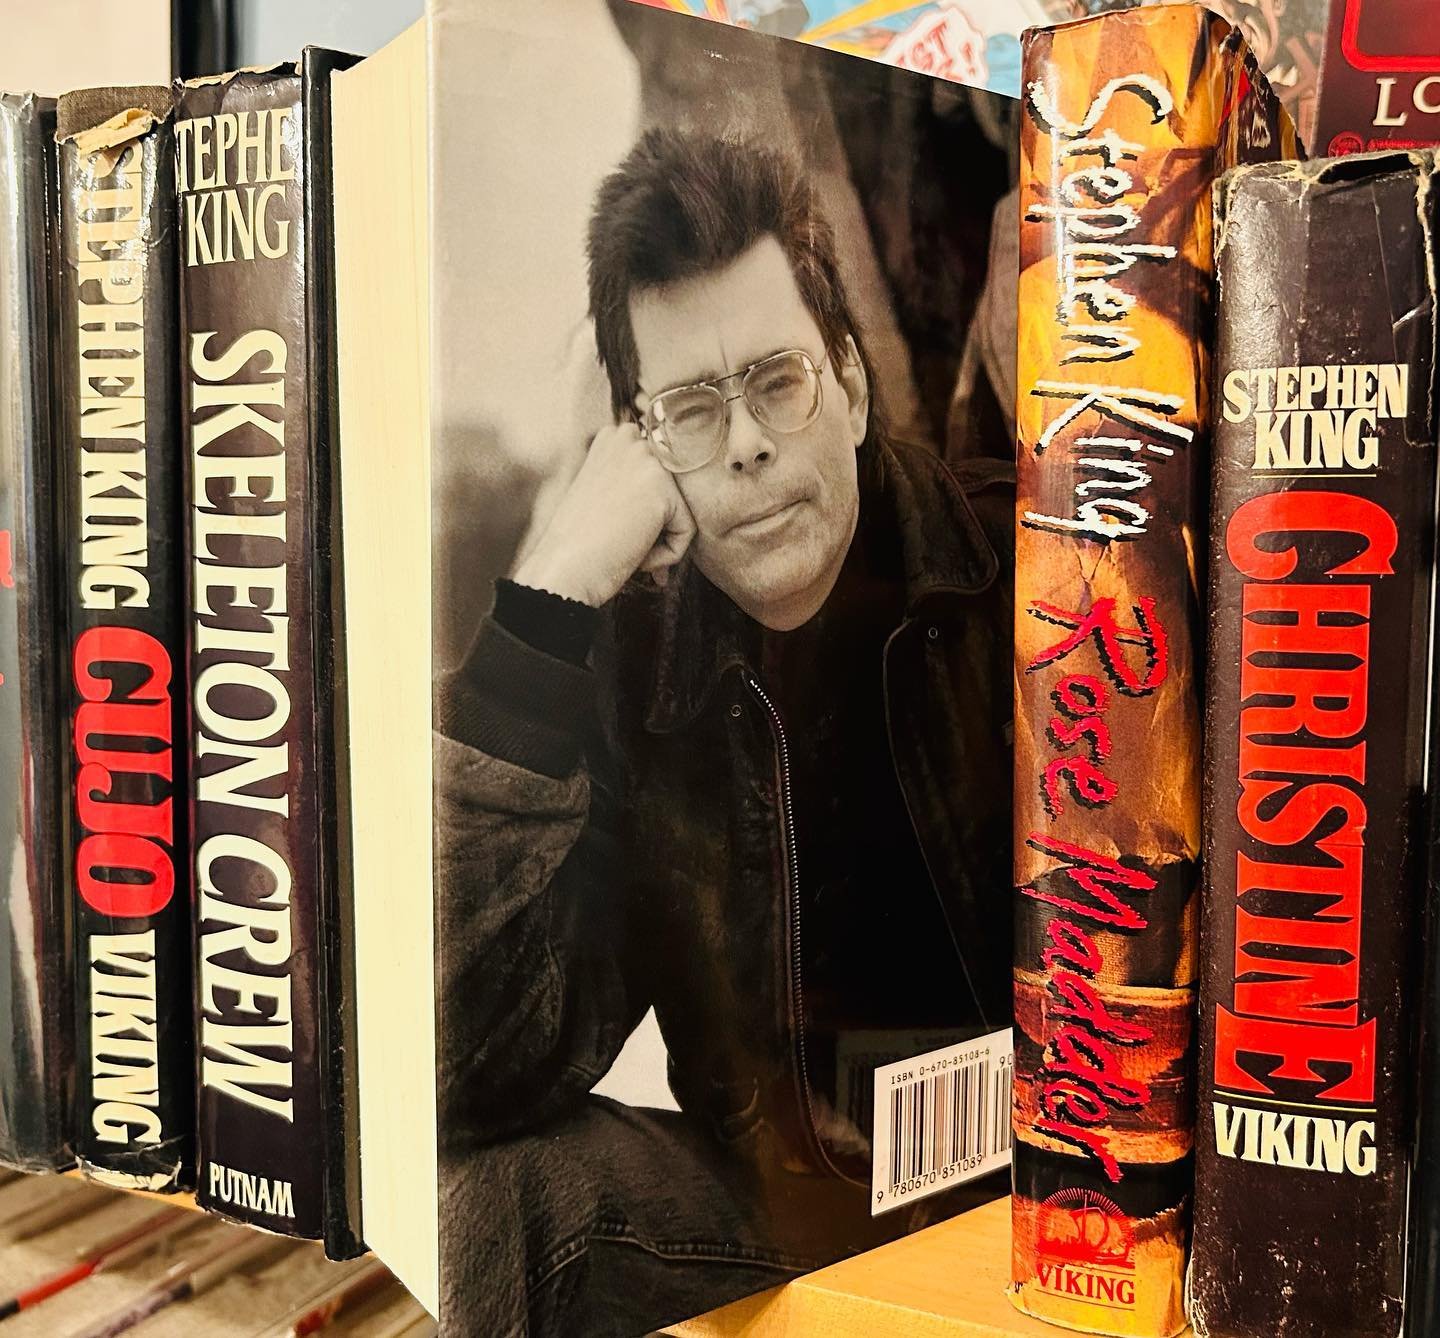 Mike Lera&rsquo;s article on STEPHEN KING - Published in Horror-Nation @horror_nation1015 ☝️Click &ldquo;Horror Nation&rdquo; link in Bio ☝️
Photo: Mike Lera 
#stephenking #horrornation #MikeLera #MikeLeraWriter